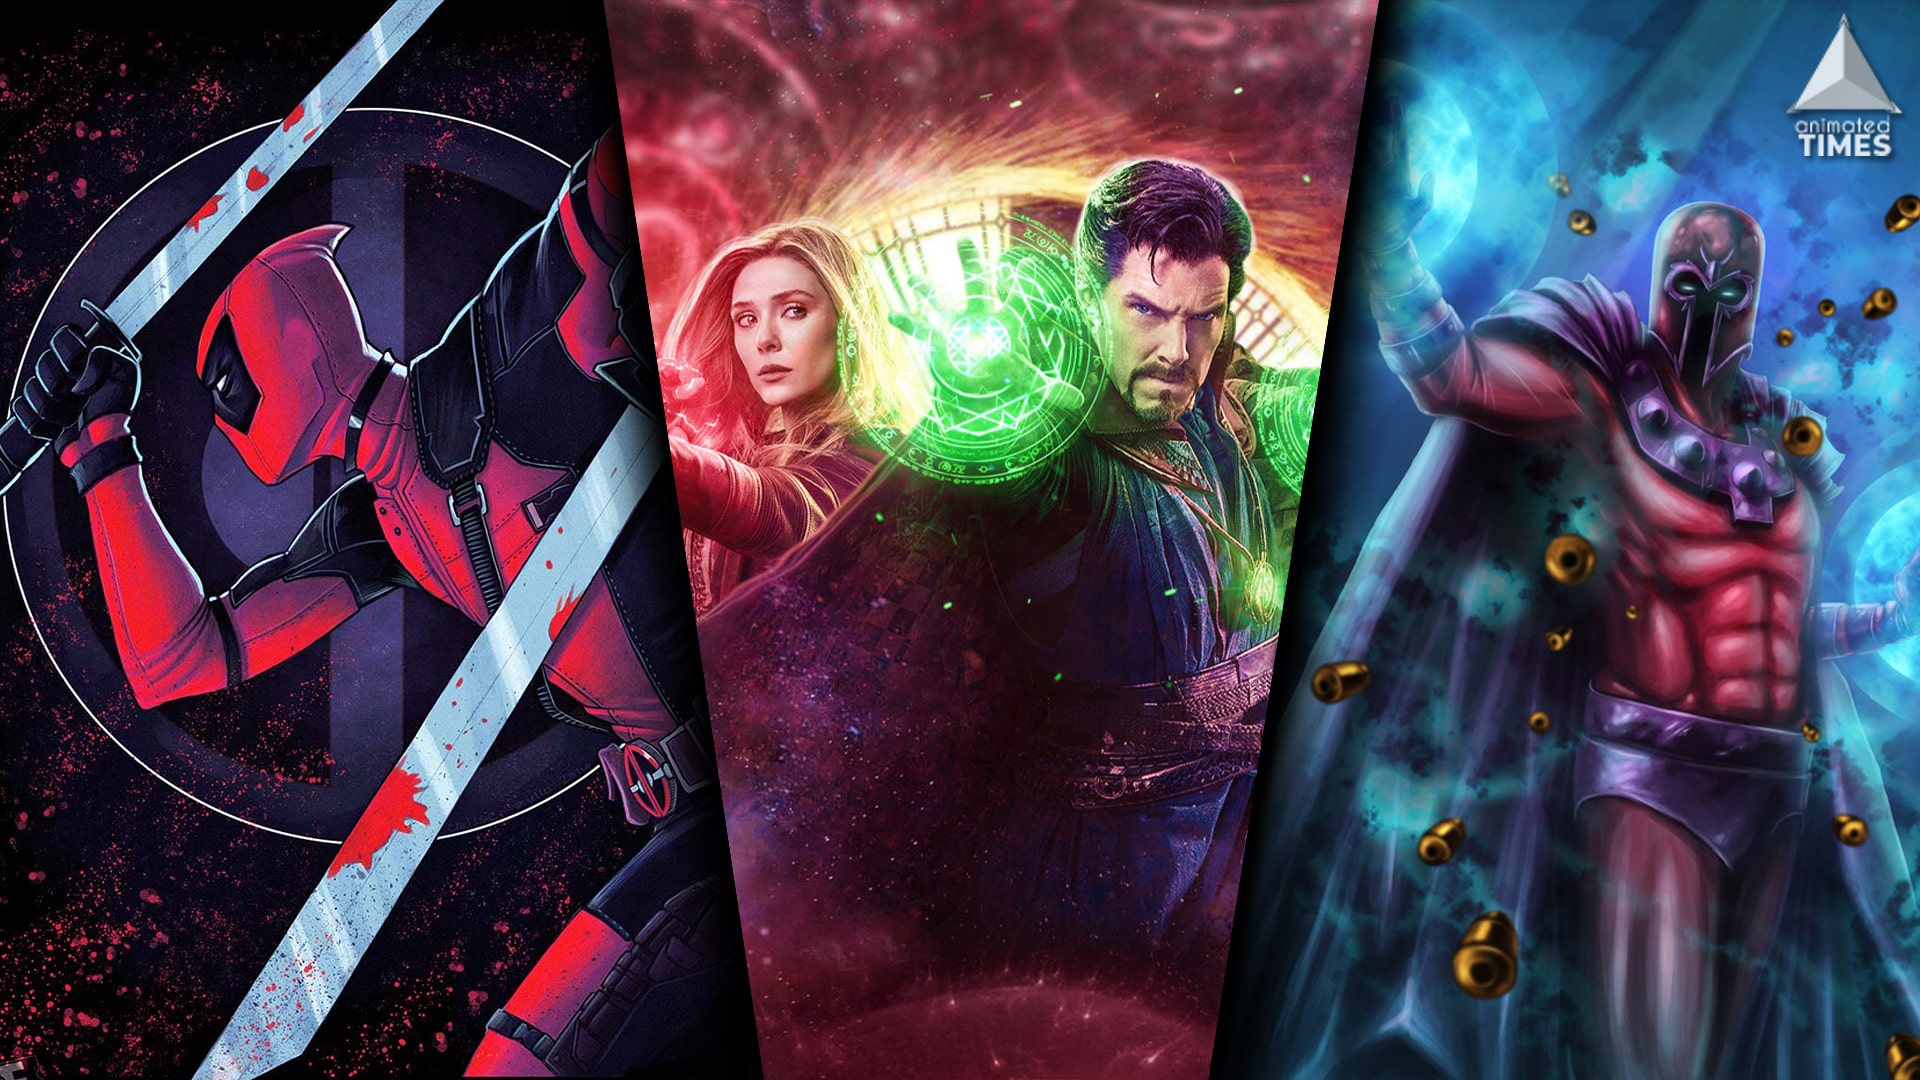 All Mutants Rumored & Confirmed to Appear in MCU Phase 4 Projects